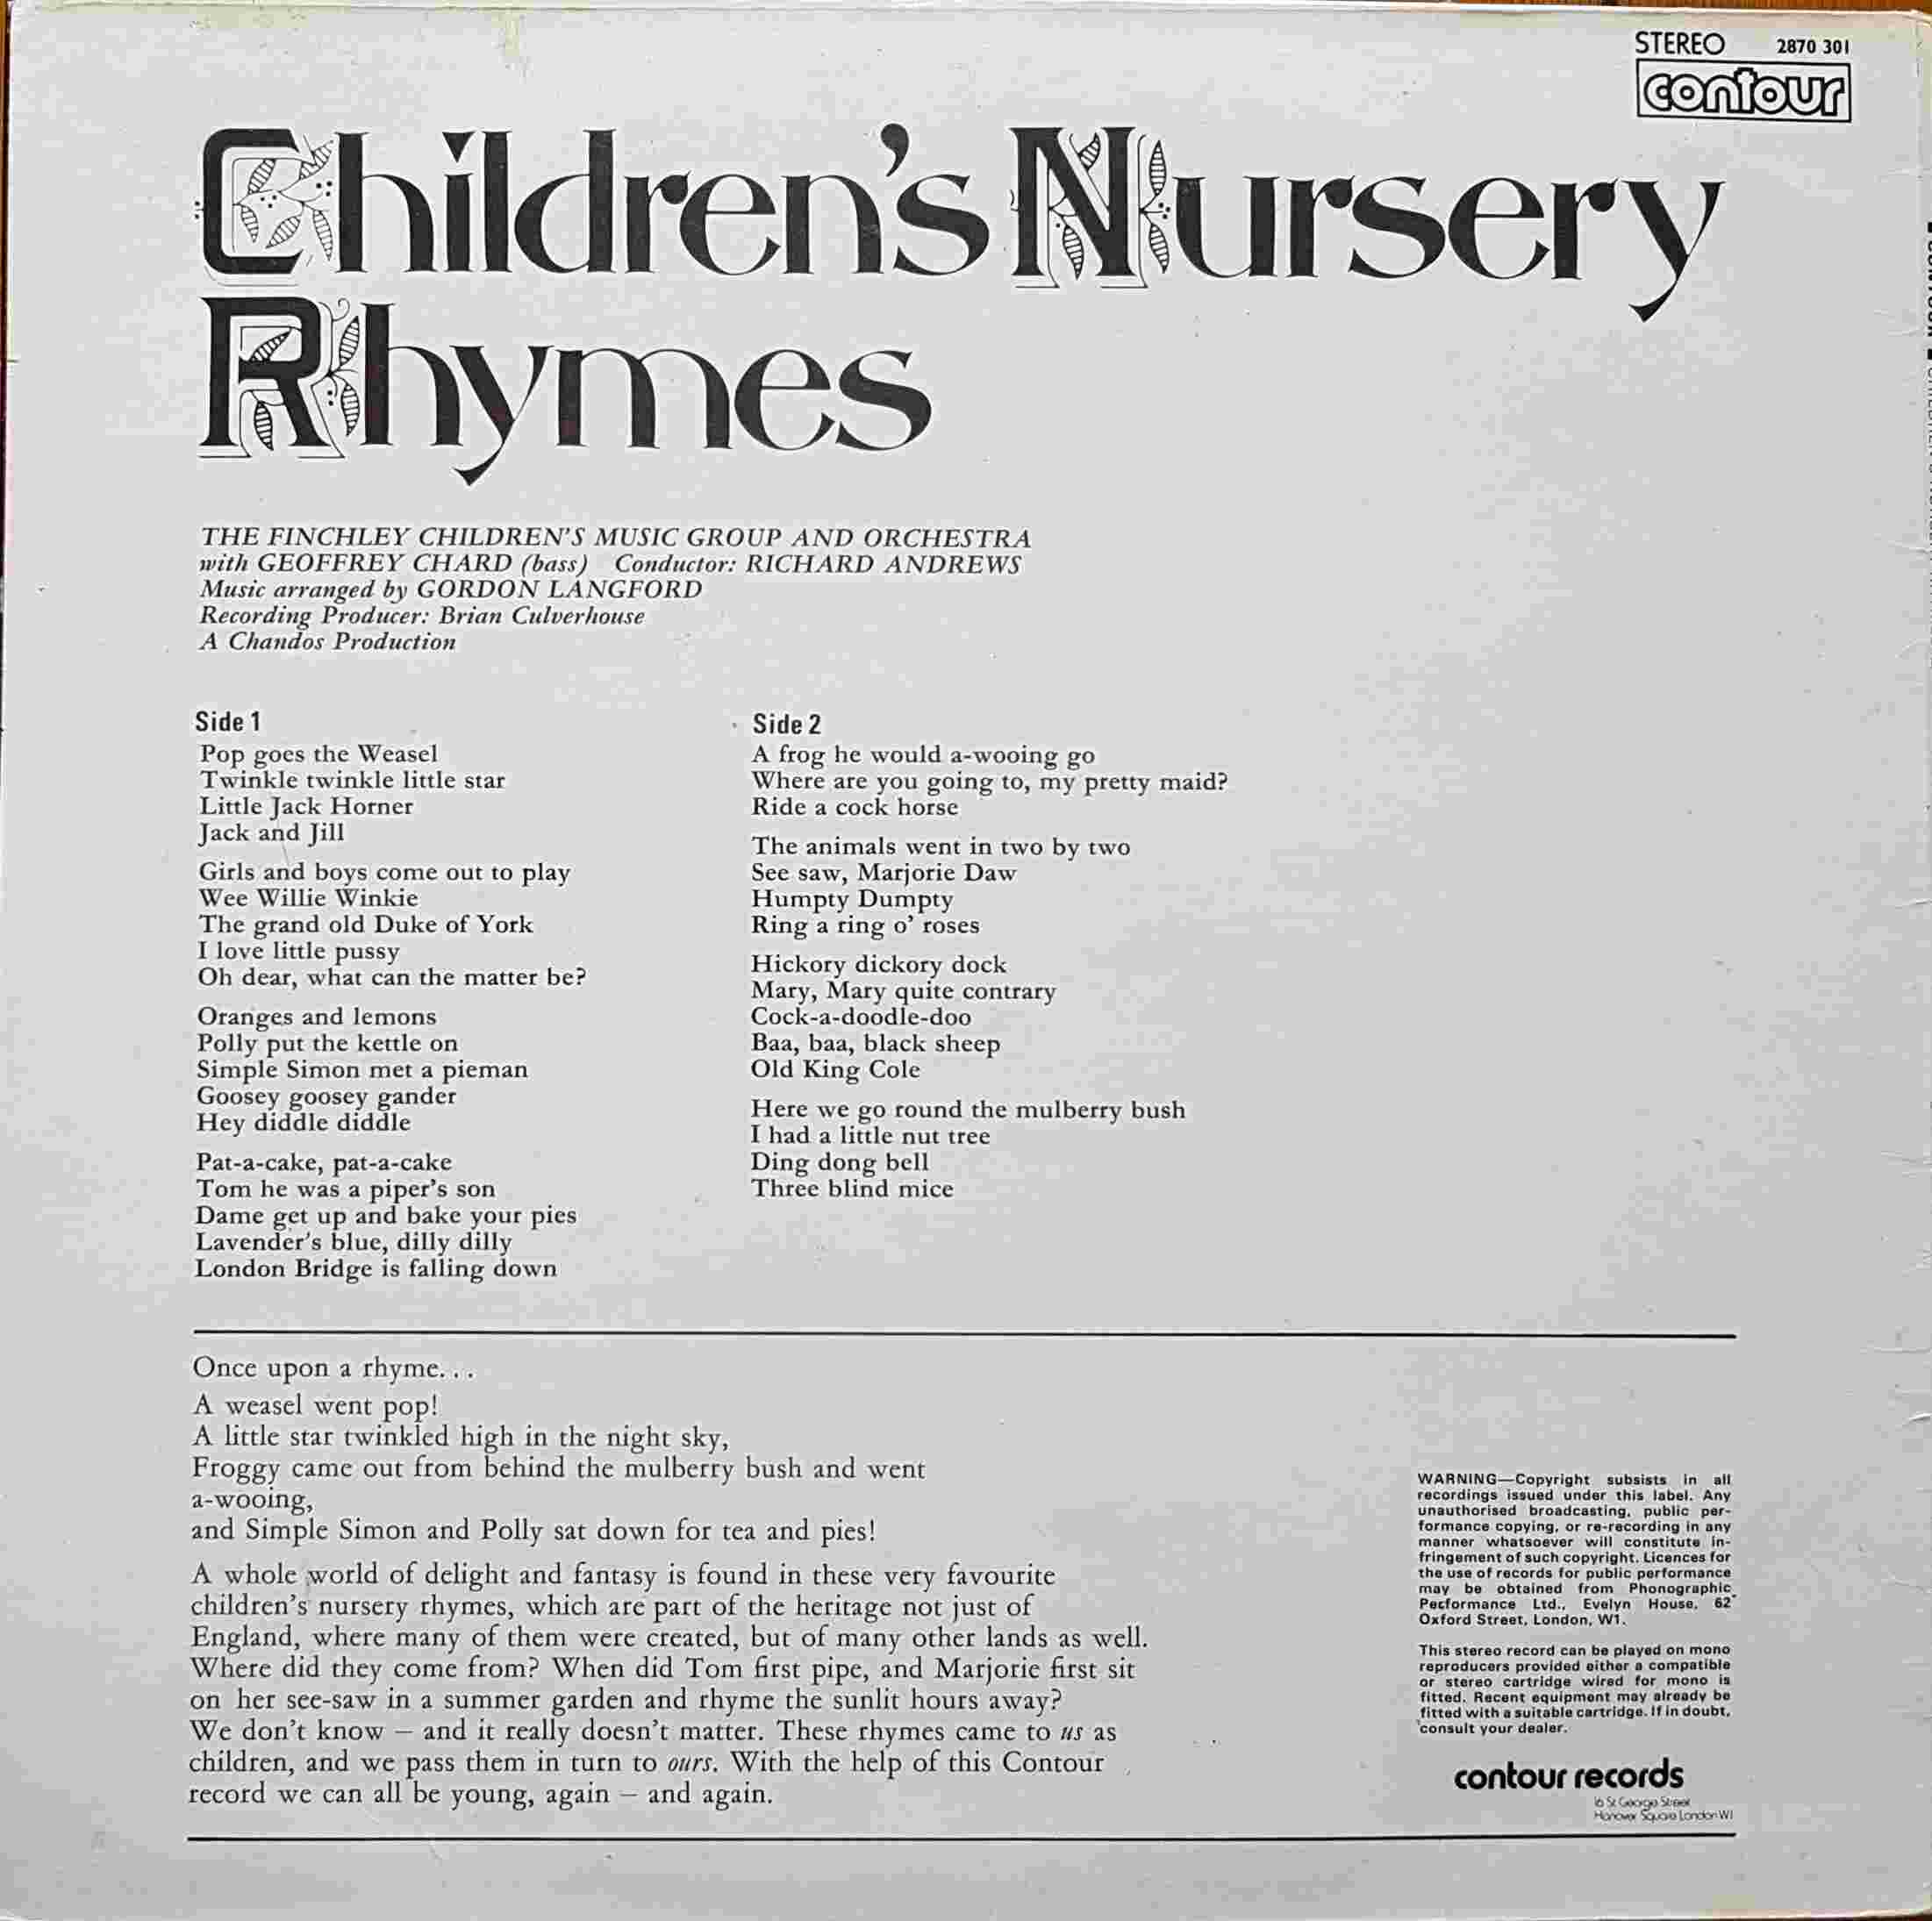 Picture of C 2870301 Children's nursery rhymes by artist Various from ITV, Channel 4 and Channel 5 library